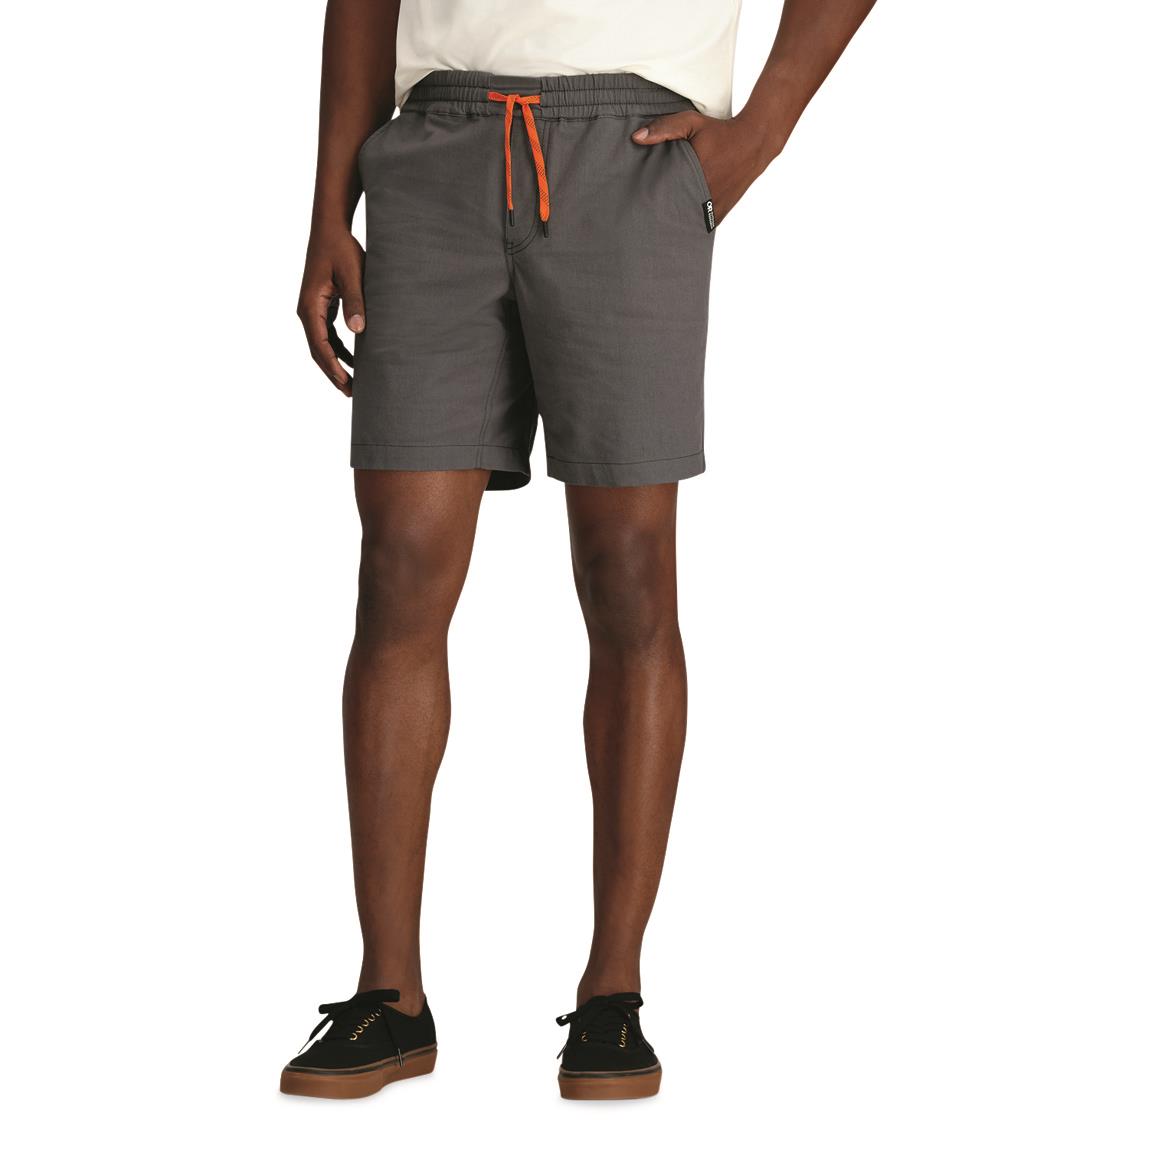 Outdoor Research Men's Canvas Shorts, 8" inseam, Storm